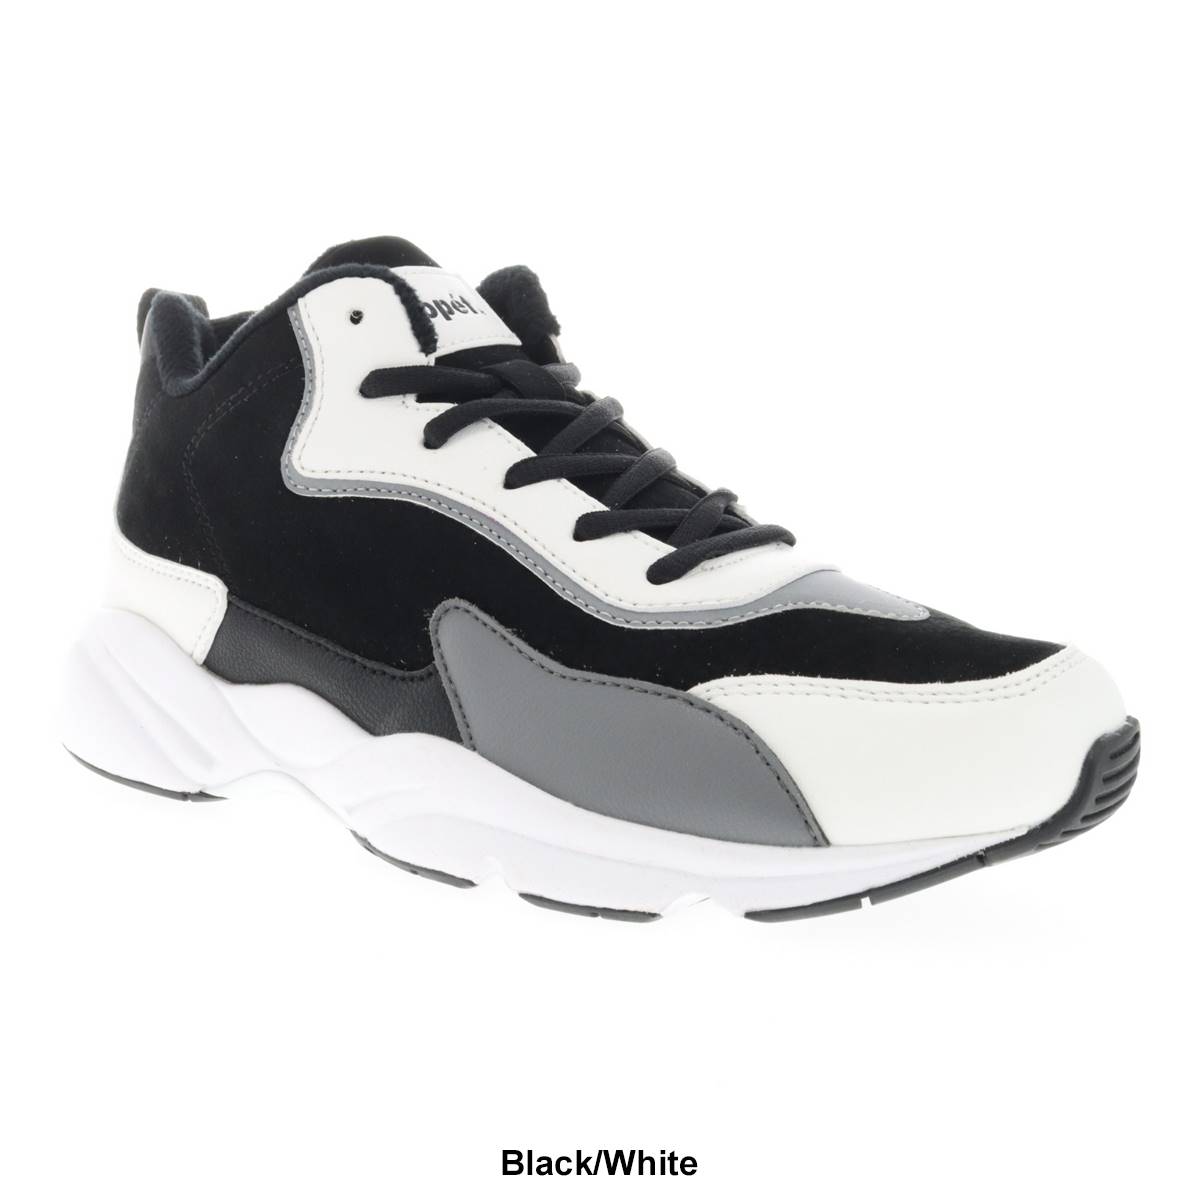 Mens Propet(R) Stability Mid Sneakers